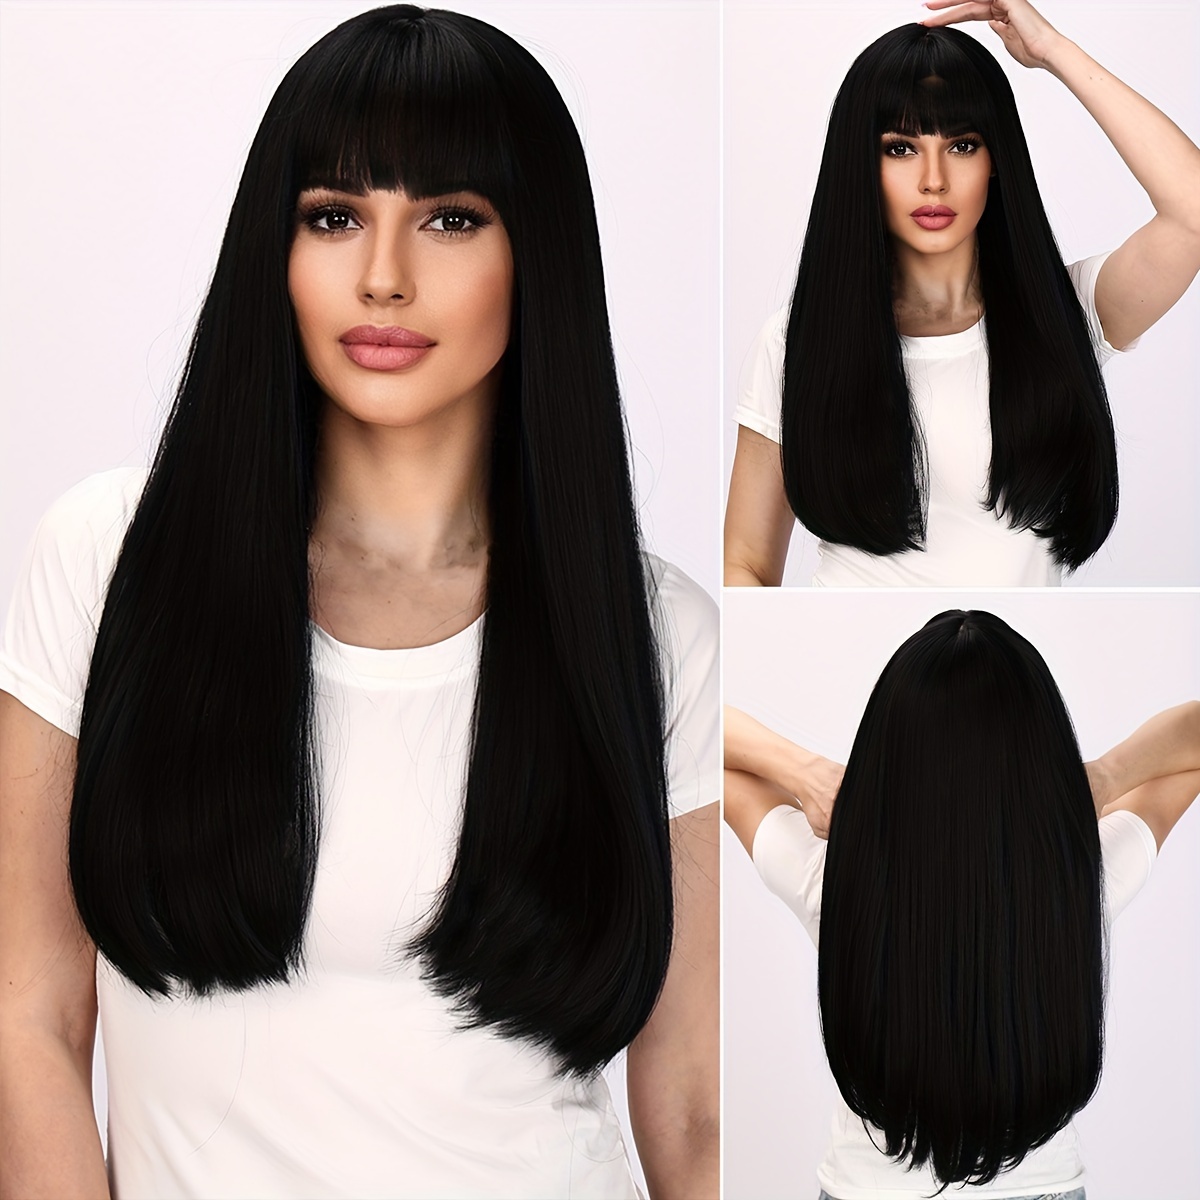 

Smilco 24inch Fashionable And Elegant Women's Black Banged Synthetic Straight Hair Wig - Heat-resistant, Easy To Shape, Paired With A Comfortable Rose Mesh Hat To Create A Daily Look